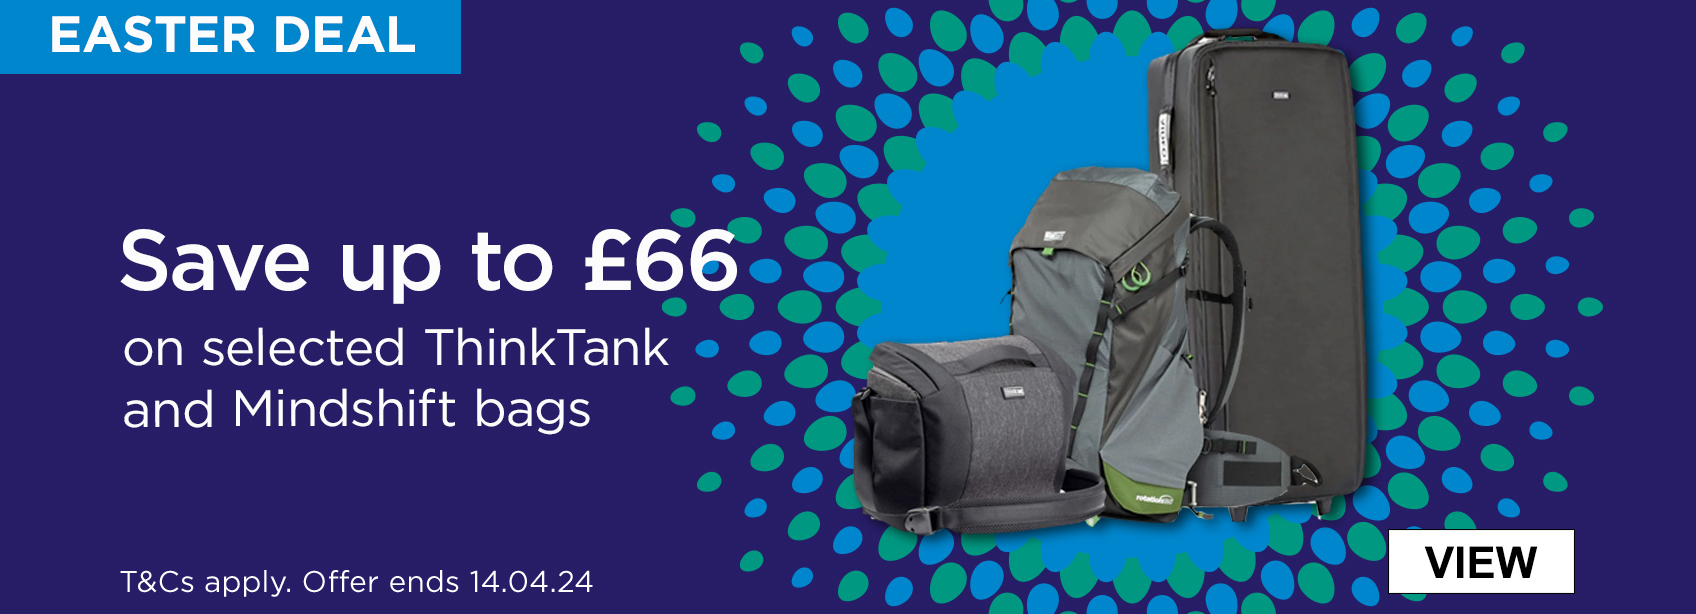 Save up to £66 on selected ThinkTank and Mindshift bags - Offer ends 14.04.24